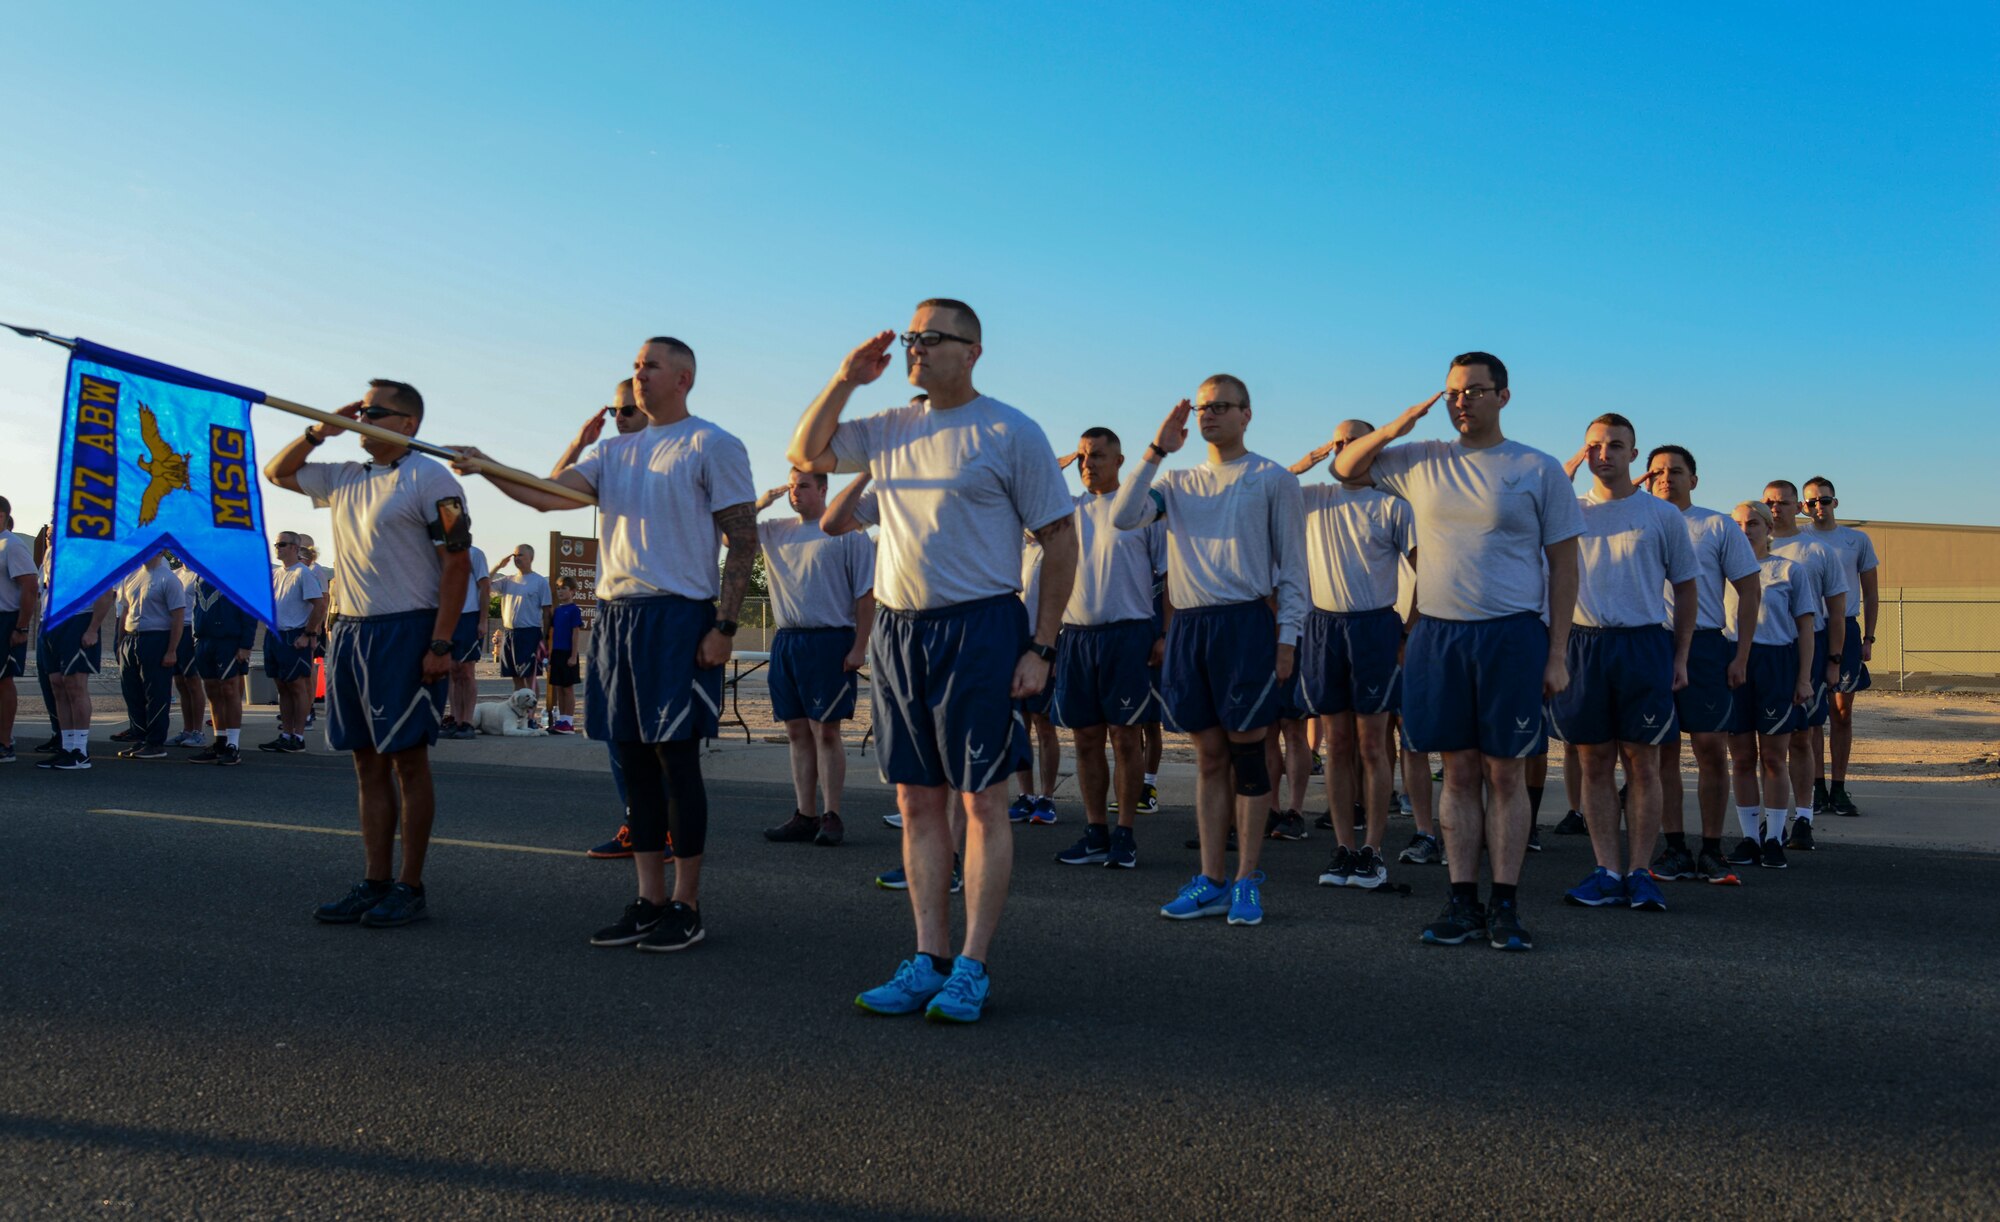 Members of 377th Mission Support Group stand in formation during revile before a Wing Tiger Run at Kirtland Air Force Base, N.M., August 16, 2019.  Wing Tiger Runs are held quarterly to bring different units of the 377th Air Base Wing together to increase morale and esprit de corps. (U.S. Air Force Photo by Airman 1st Class Kiana Pearson)